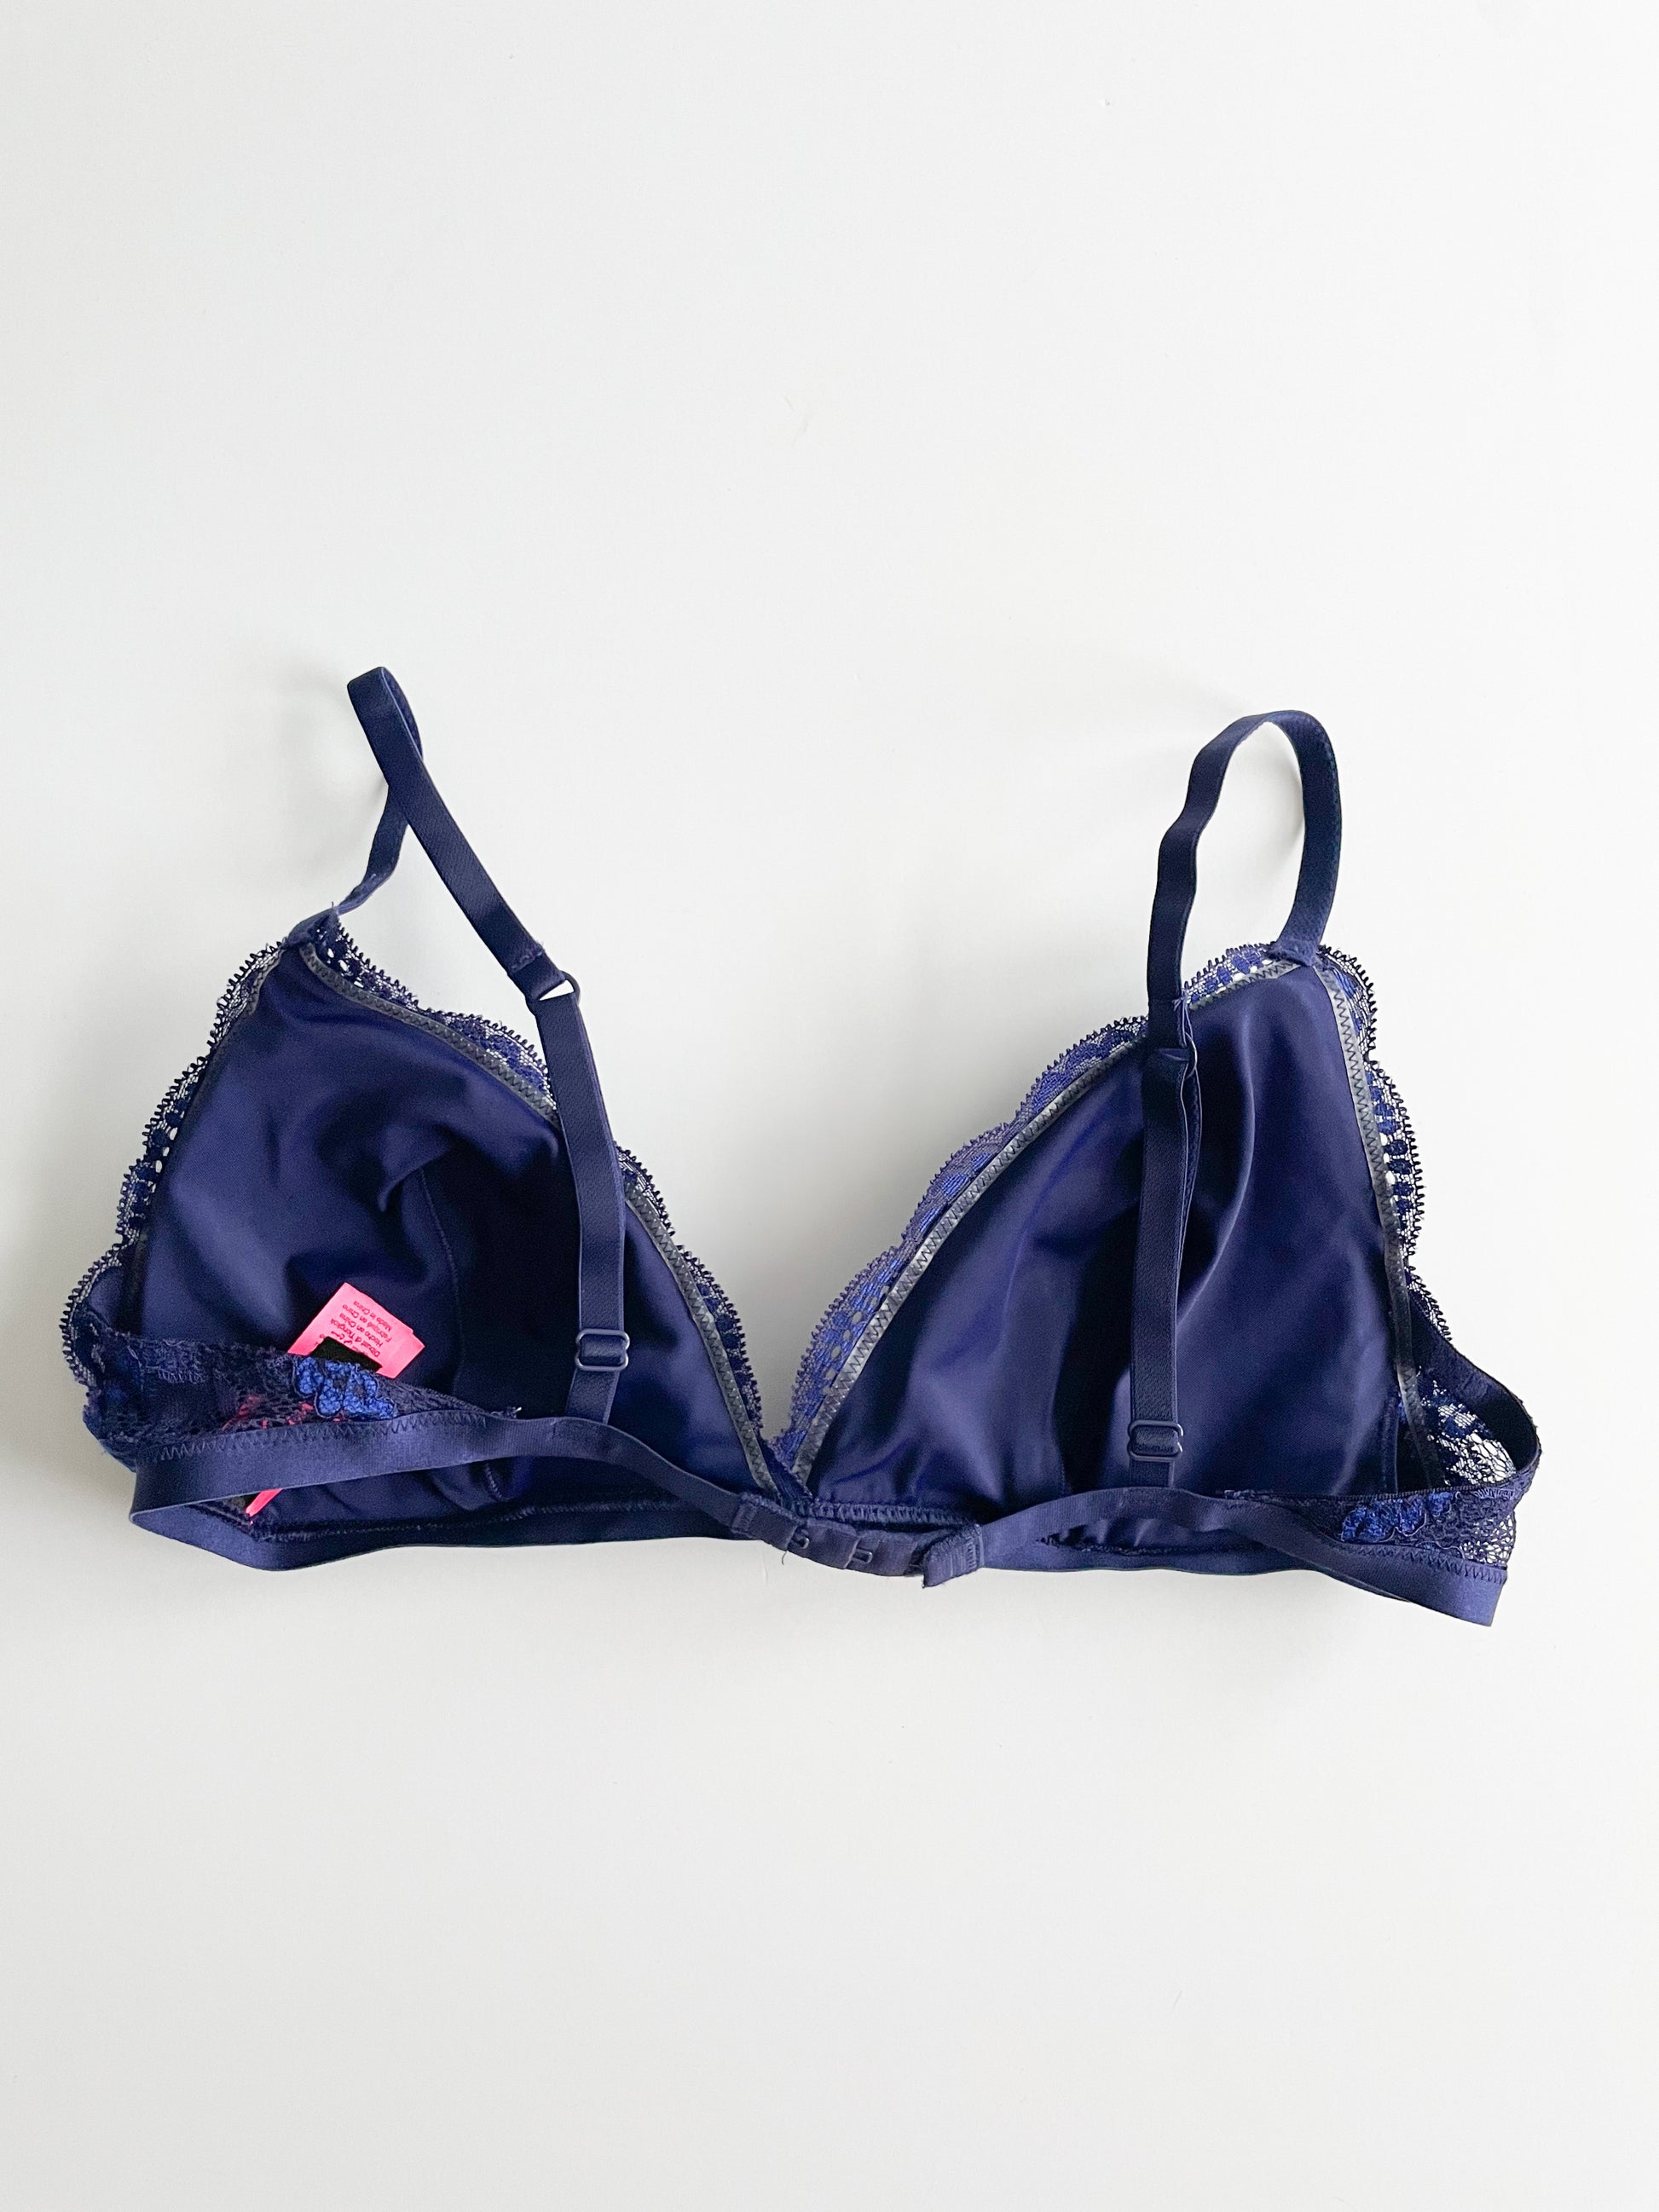 La Senza Bright Blue With Lace Bra 34DD Brand New With Labels RRP £35.00 